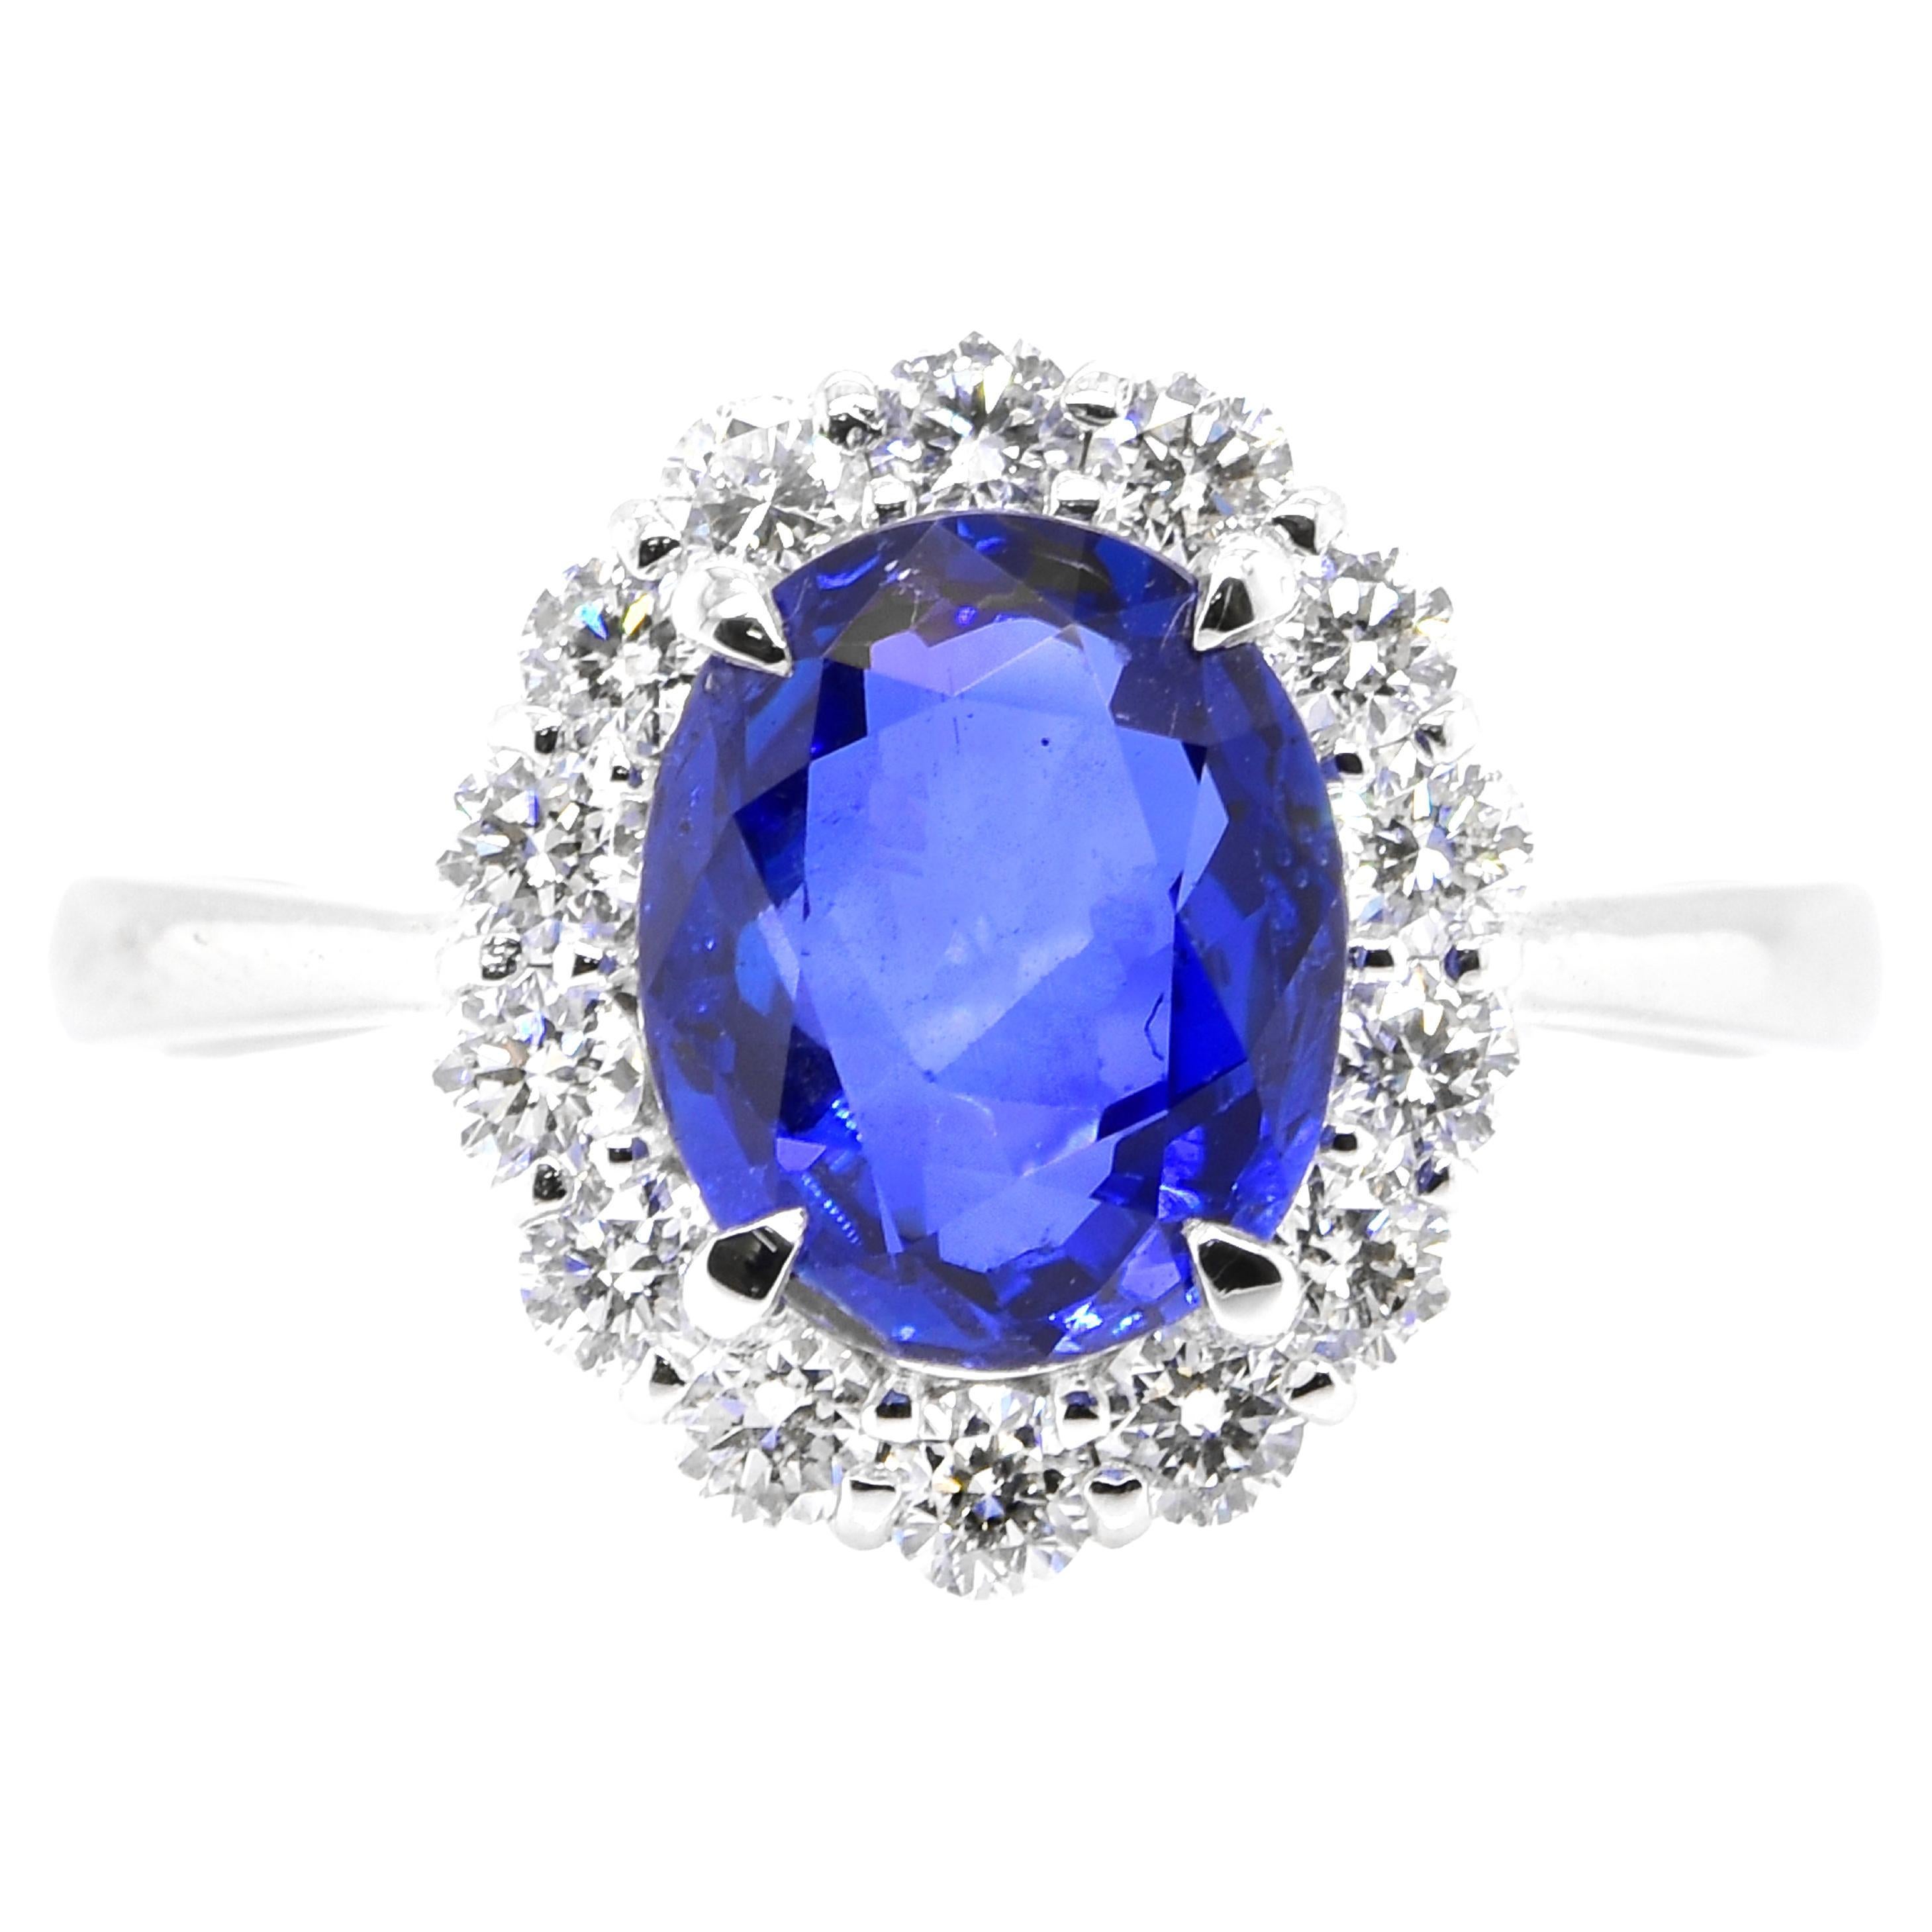 2.39 Carat Natural, Unheated, Ceylon Sapphire and Diamond Ring Made in Platinum For Sale